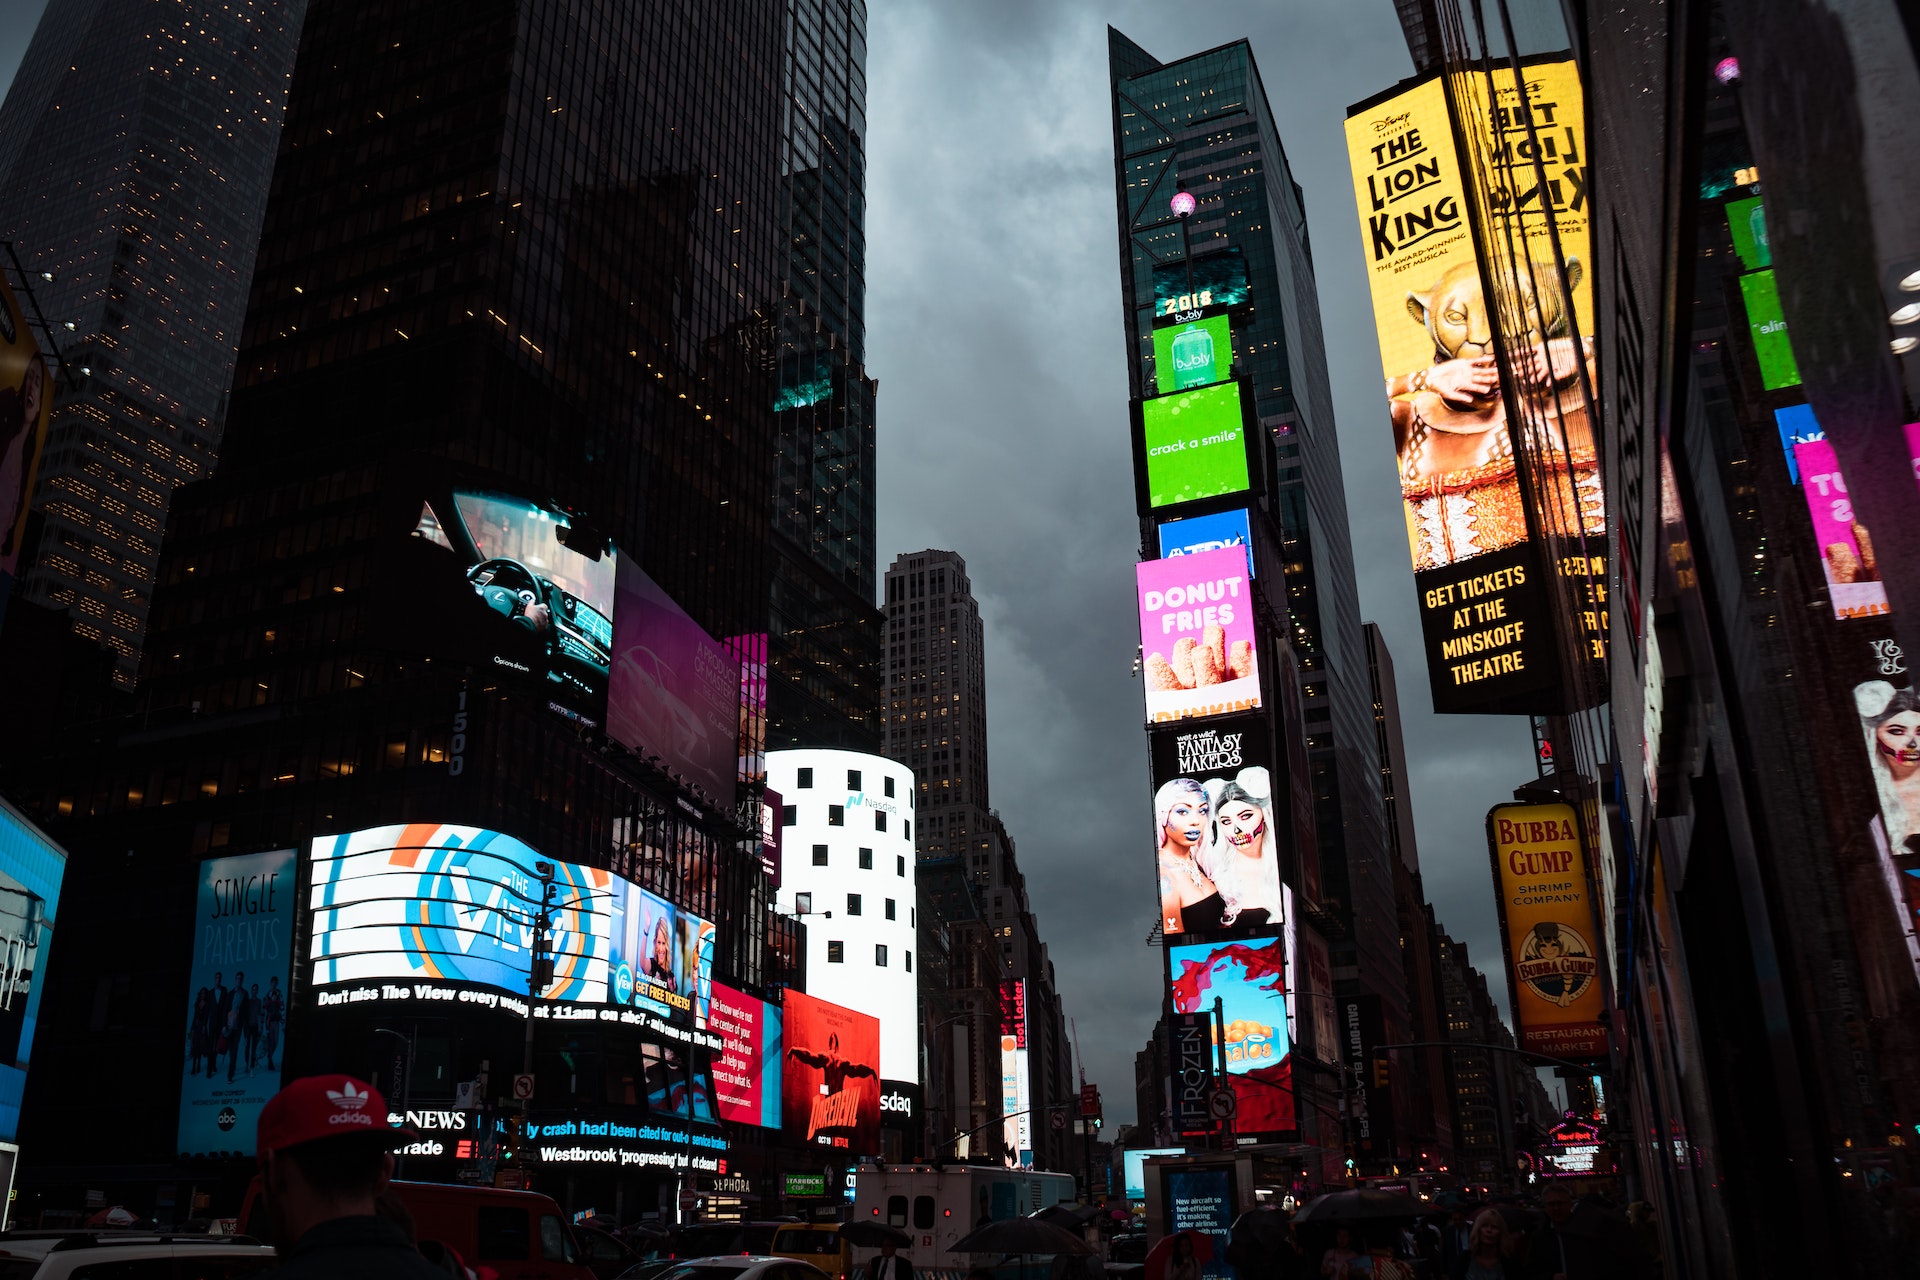 Signs lit up in Times Square, New York